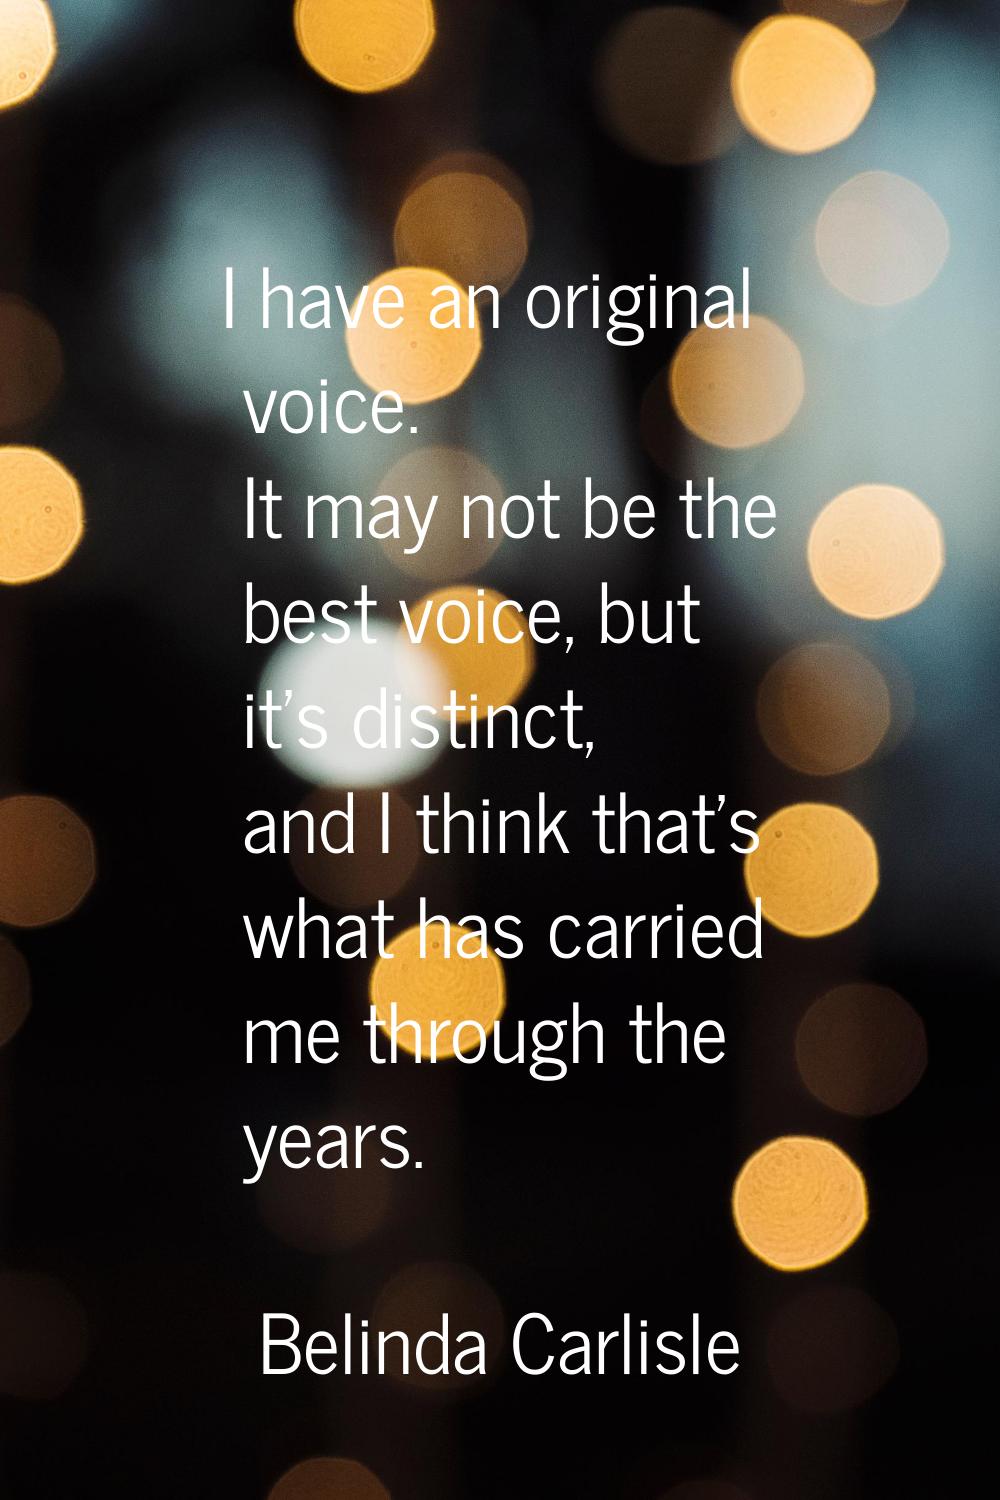 I have an original voice. It may not be the best voice, but it's distinct, and I think that's what 